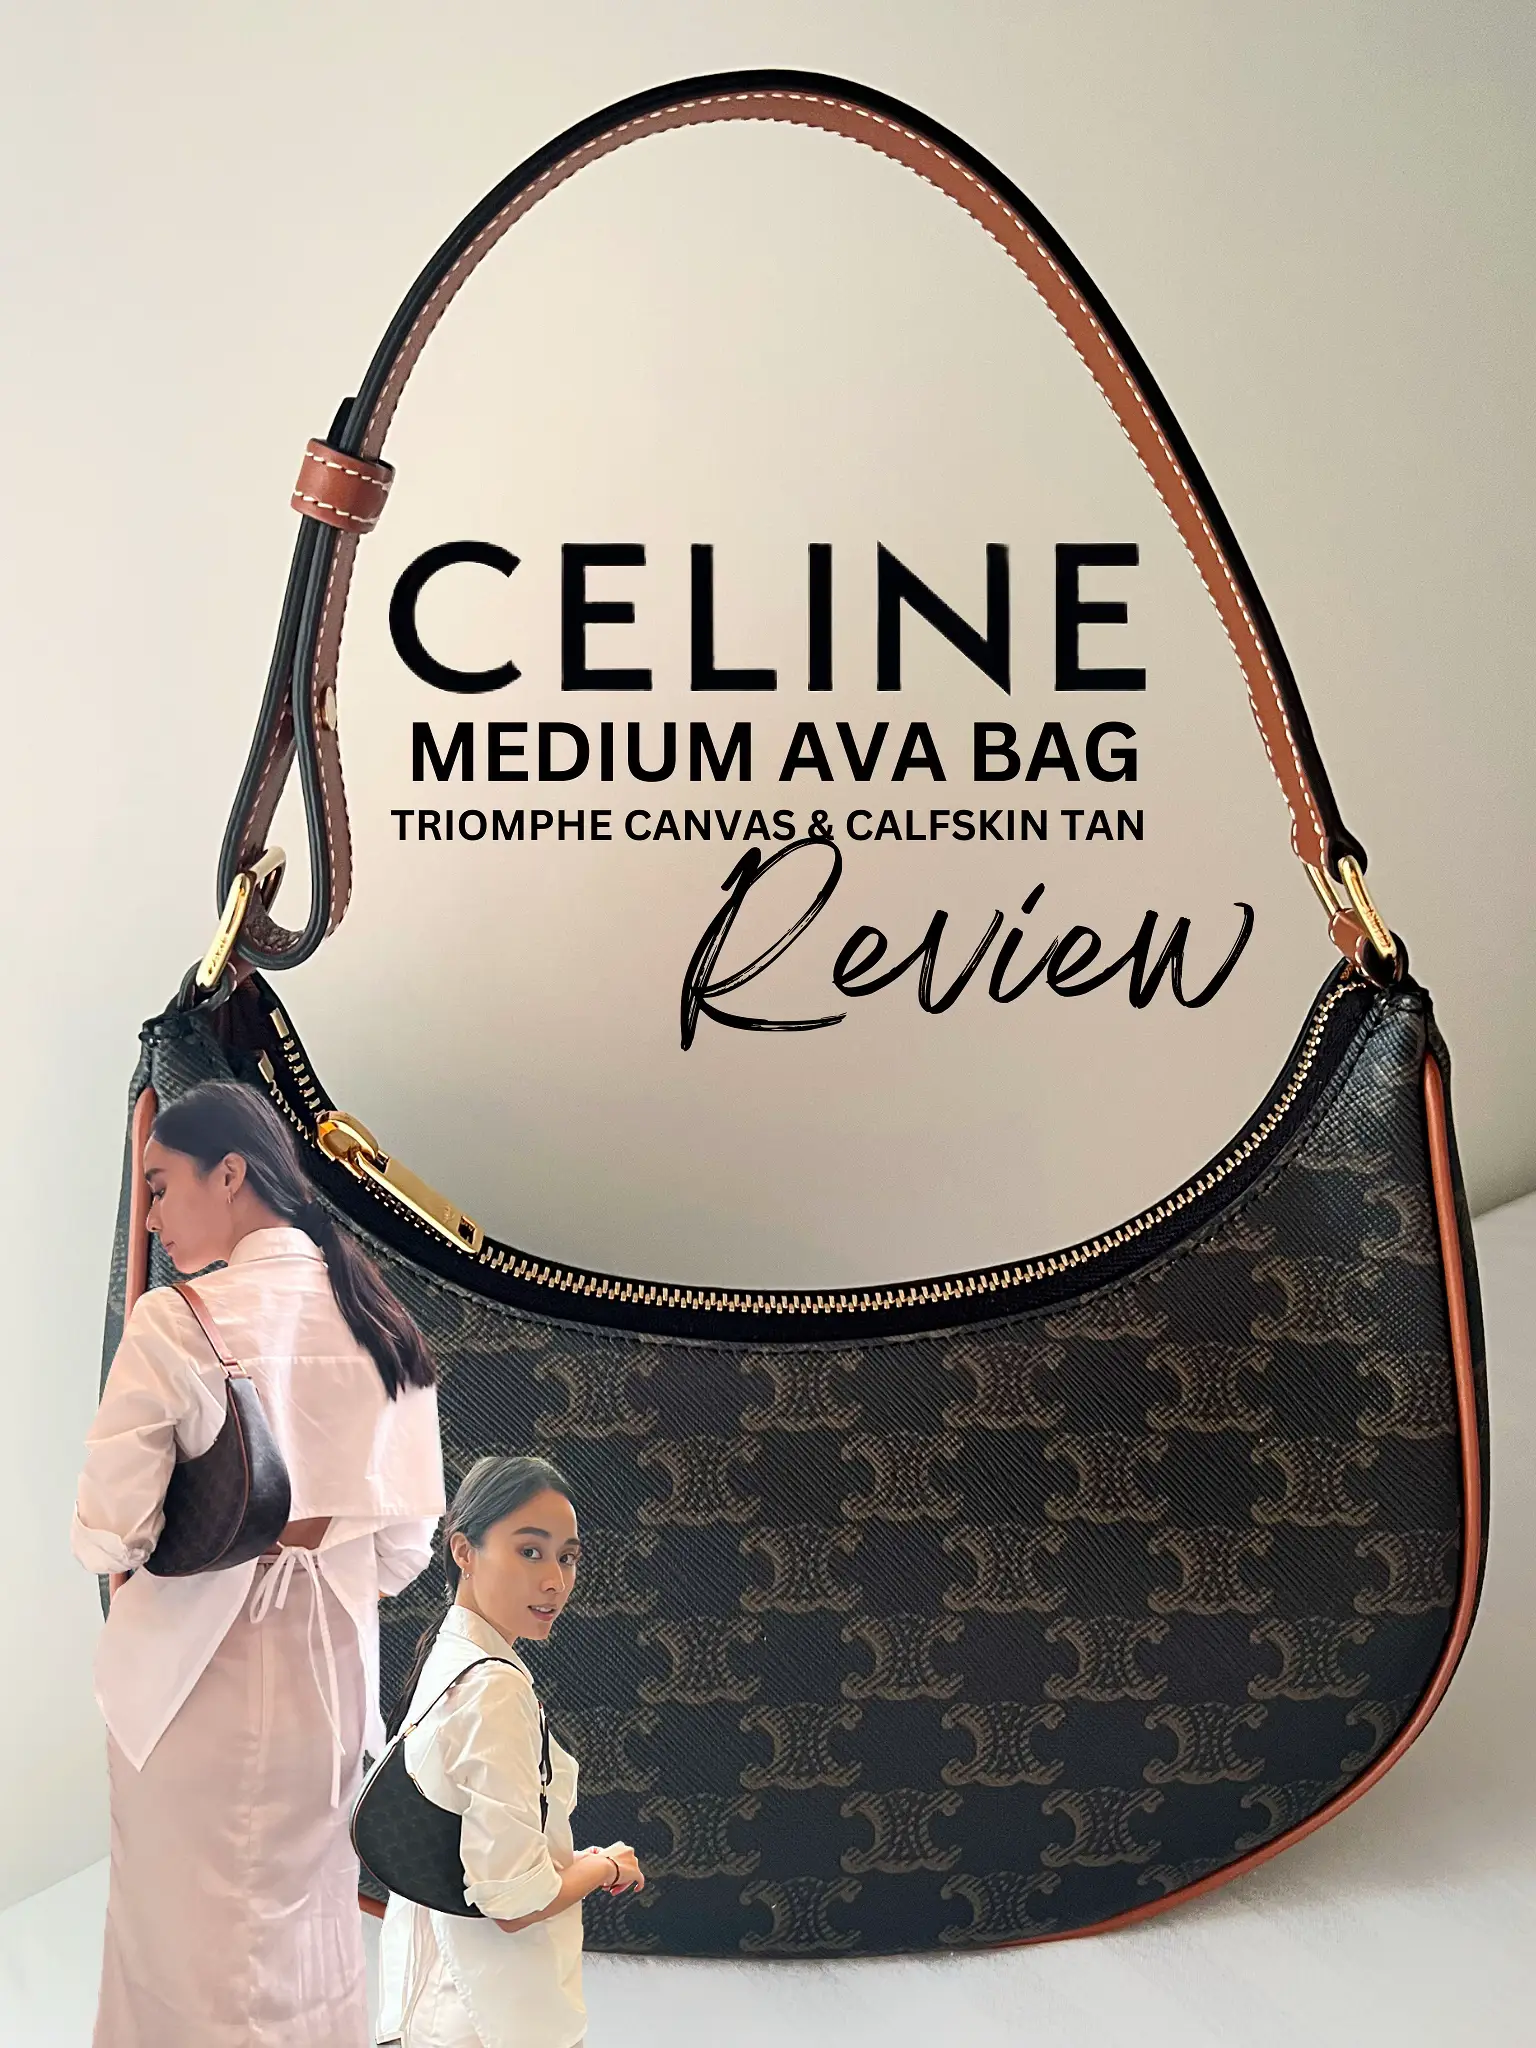 REVIEW CELINE MEDIUM AVA BAG, Gallery posted by MaryAnne